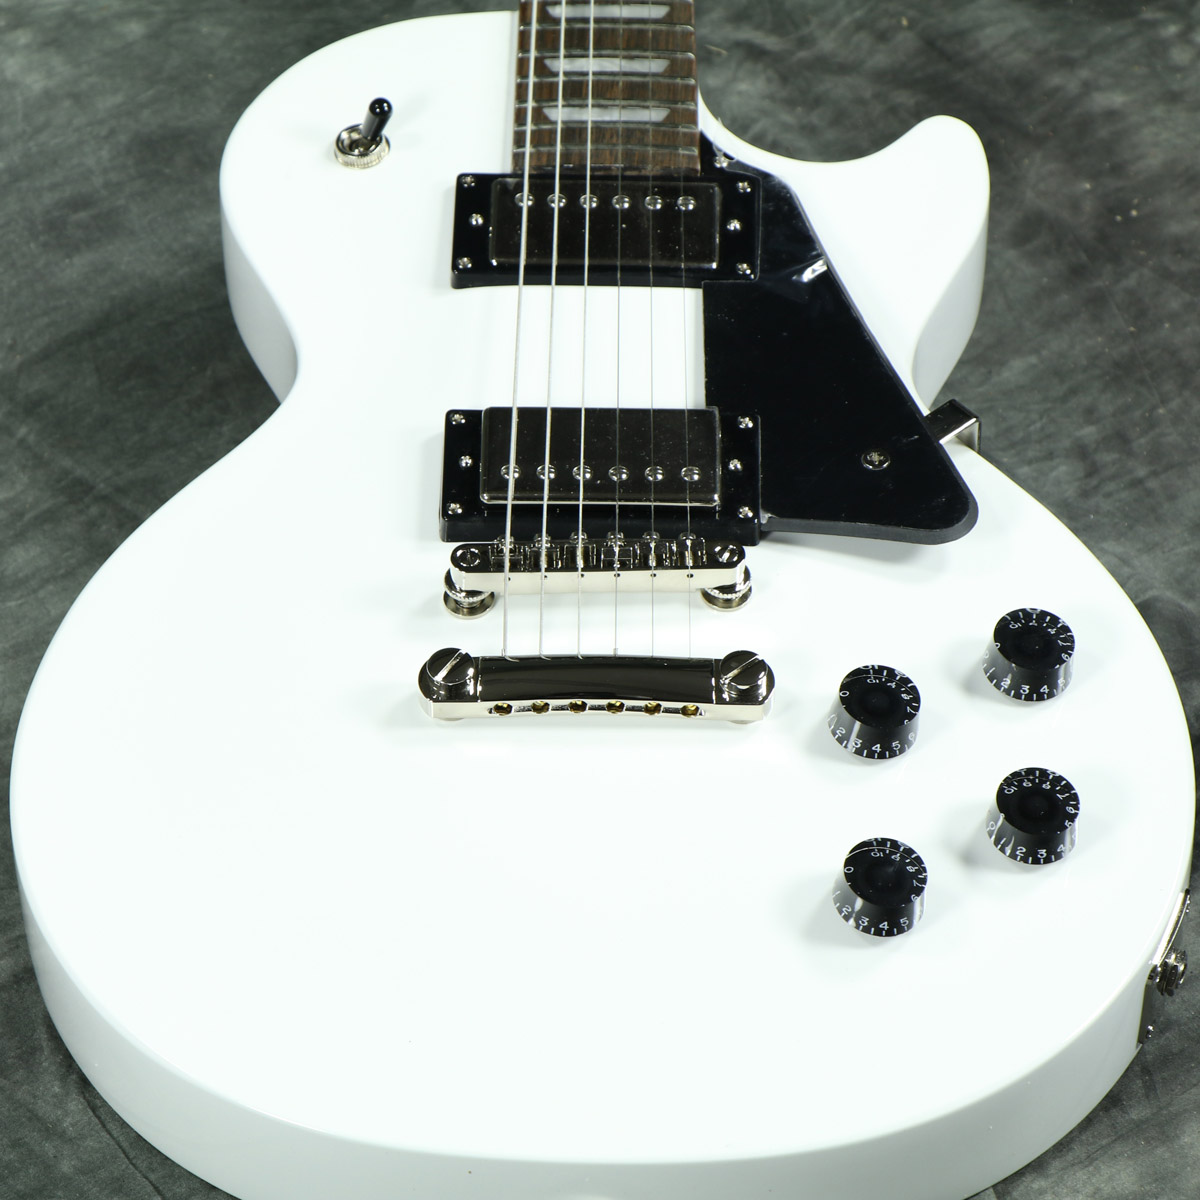 Epiphone Inspired Alpine Gibson Les Paul Studio White By エピフォン エレキギター スタジオ レスポール Sale 70 Off By